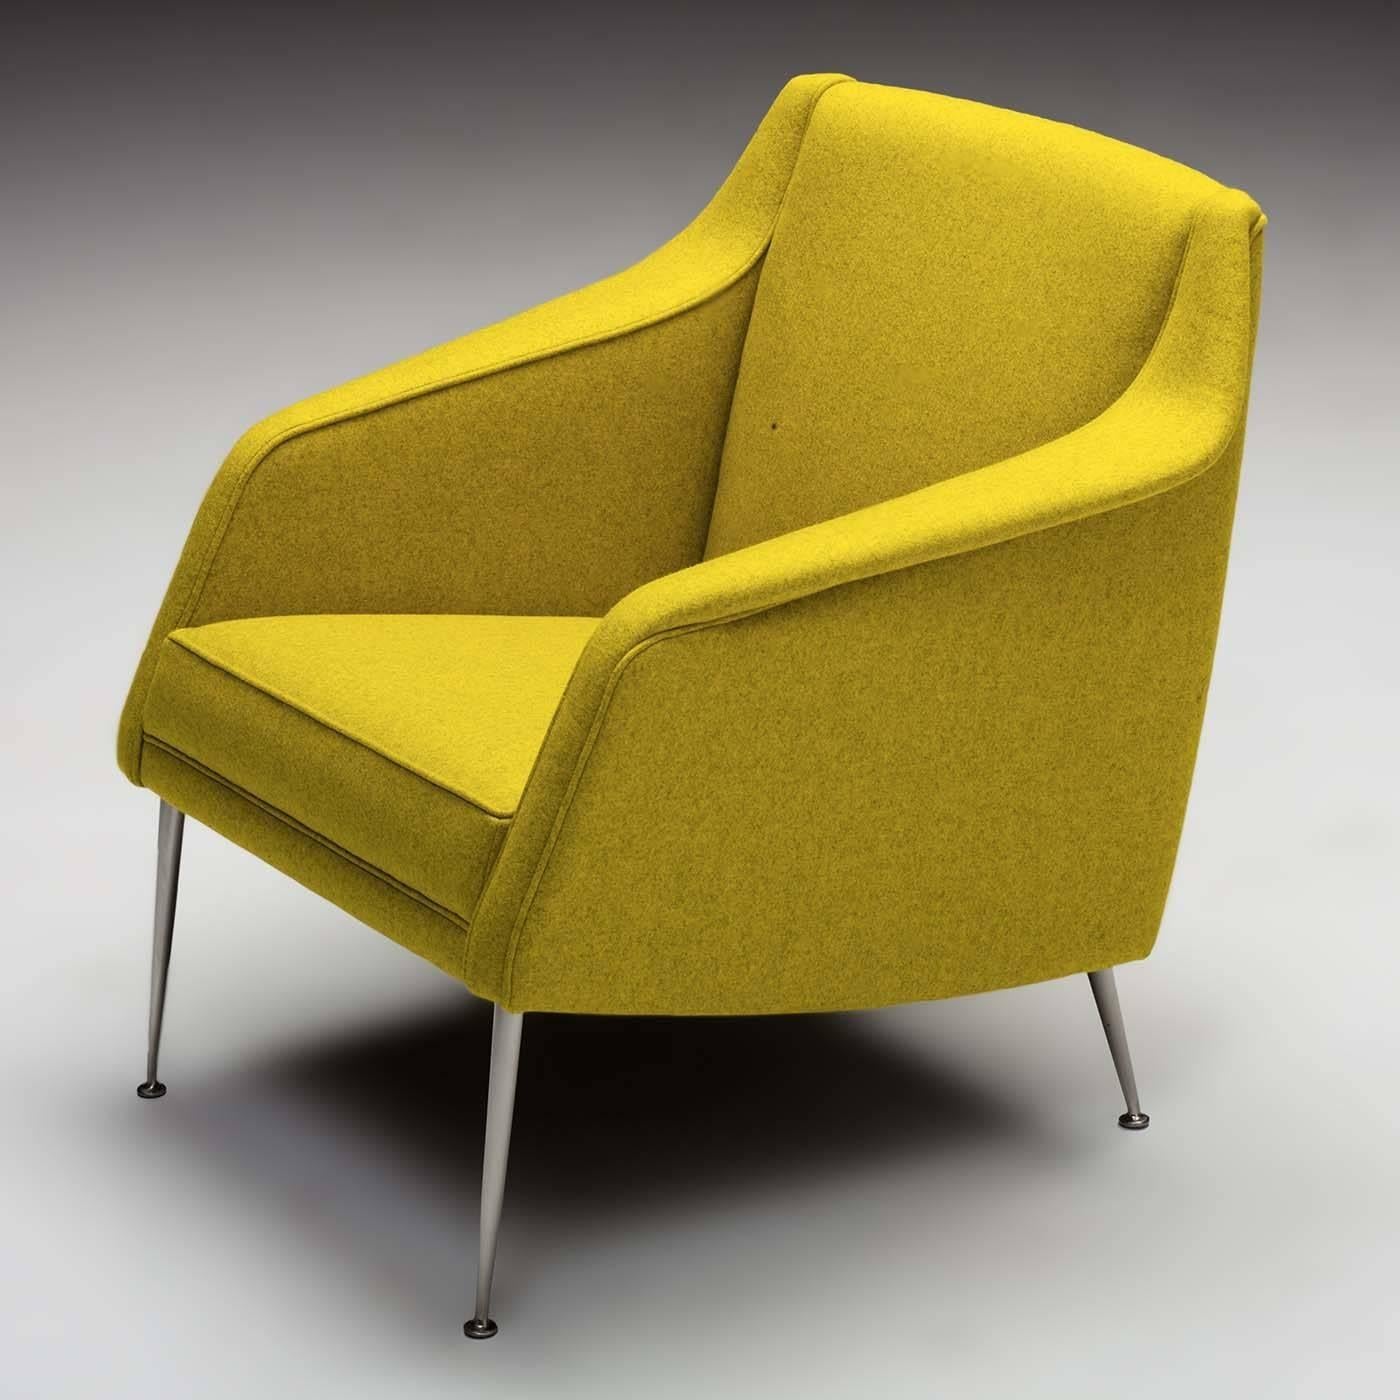 The original design for the piece was executed by Carlo de Carli, master Italian designer. In 2011 La Permanente Mobili Cantù revived the luxurious piece of furniture in celebration of the designer's 100th birthday, along with other exemplary